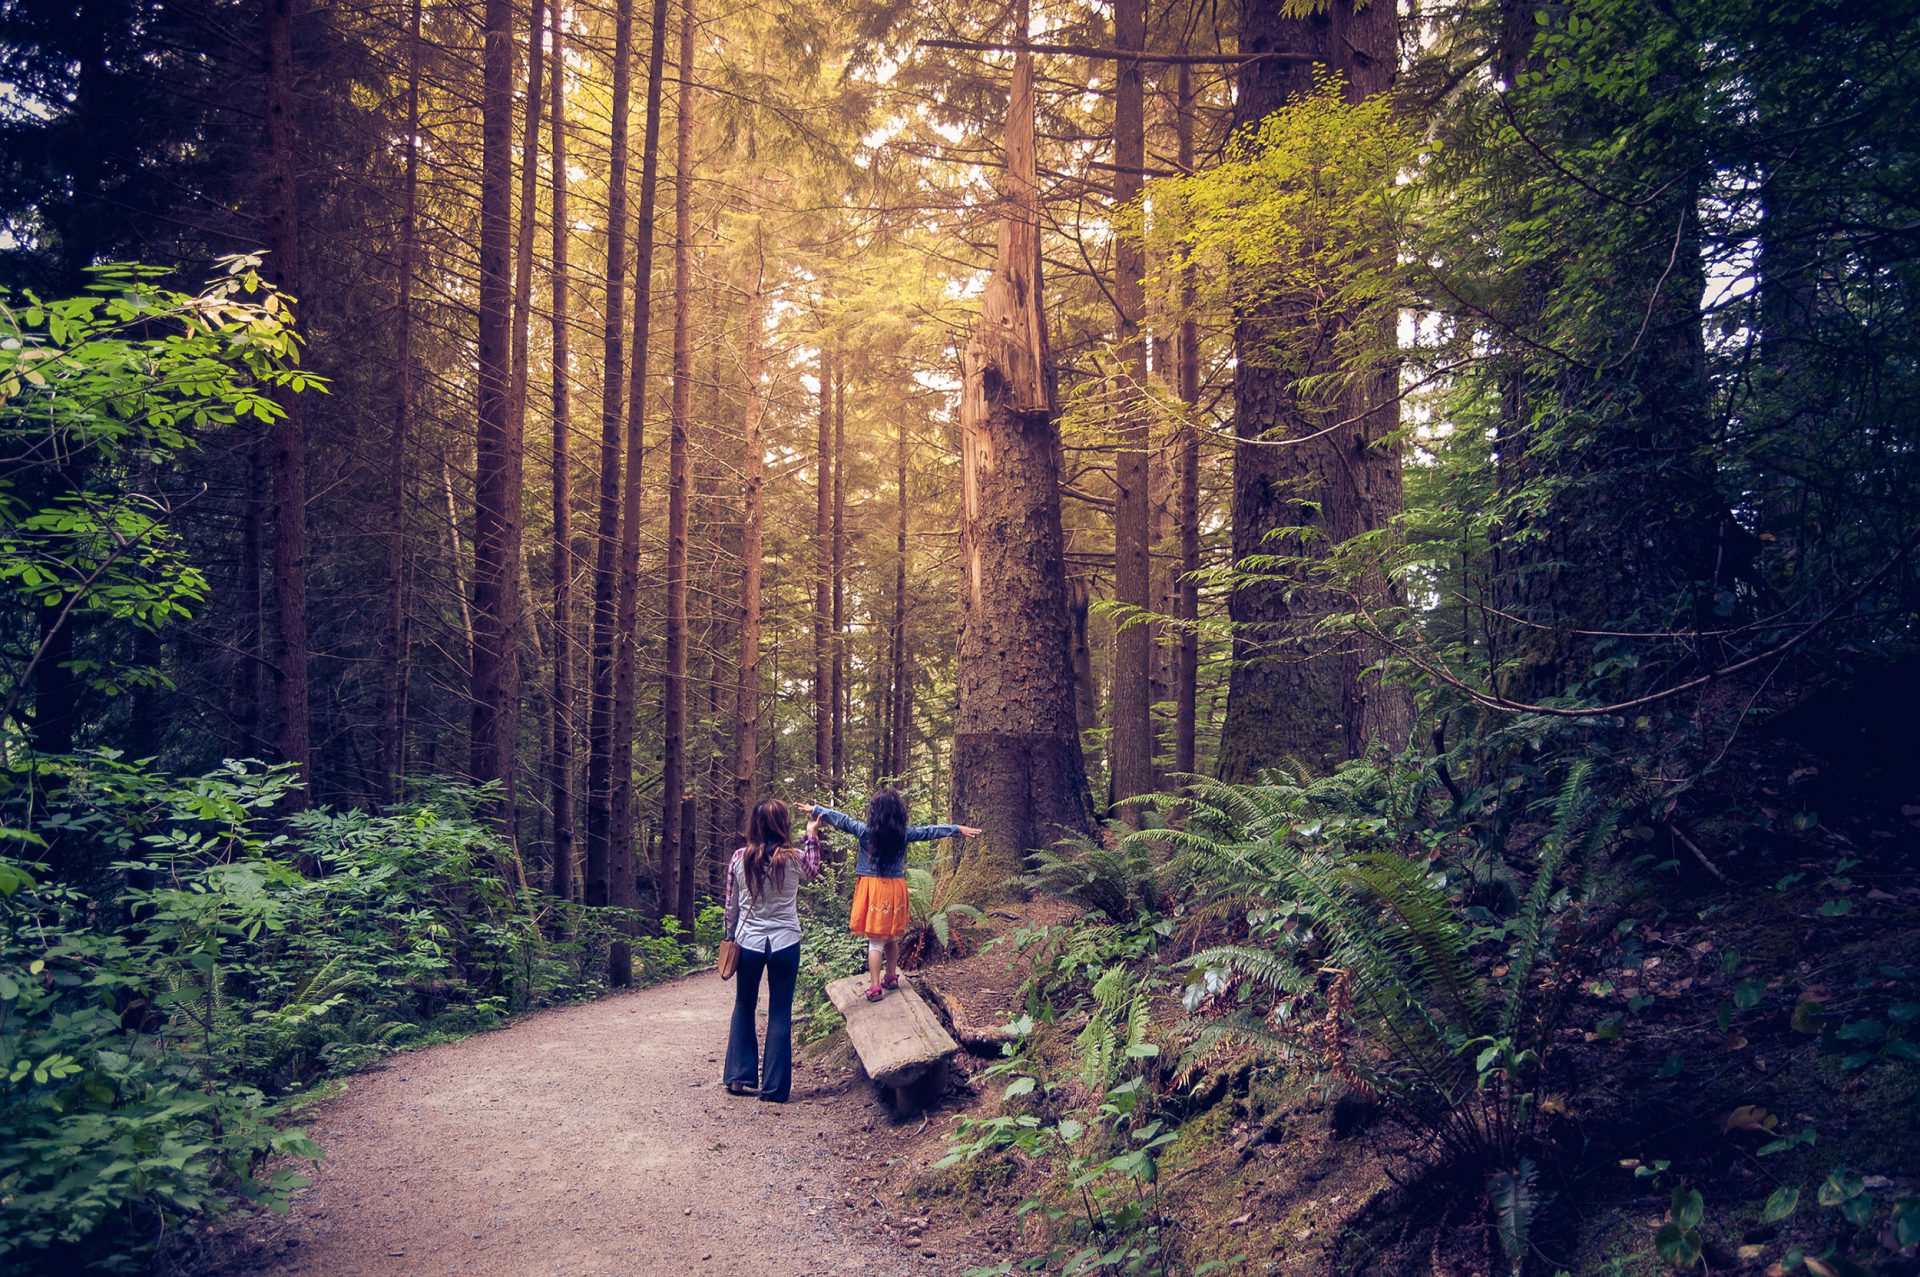 A mother and daughter enjoying a hike in a lush Oregon forest